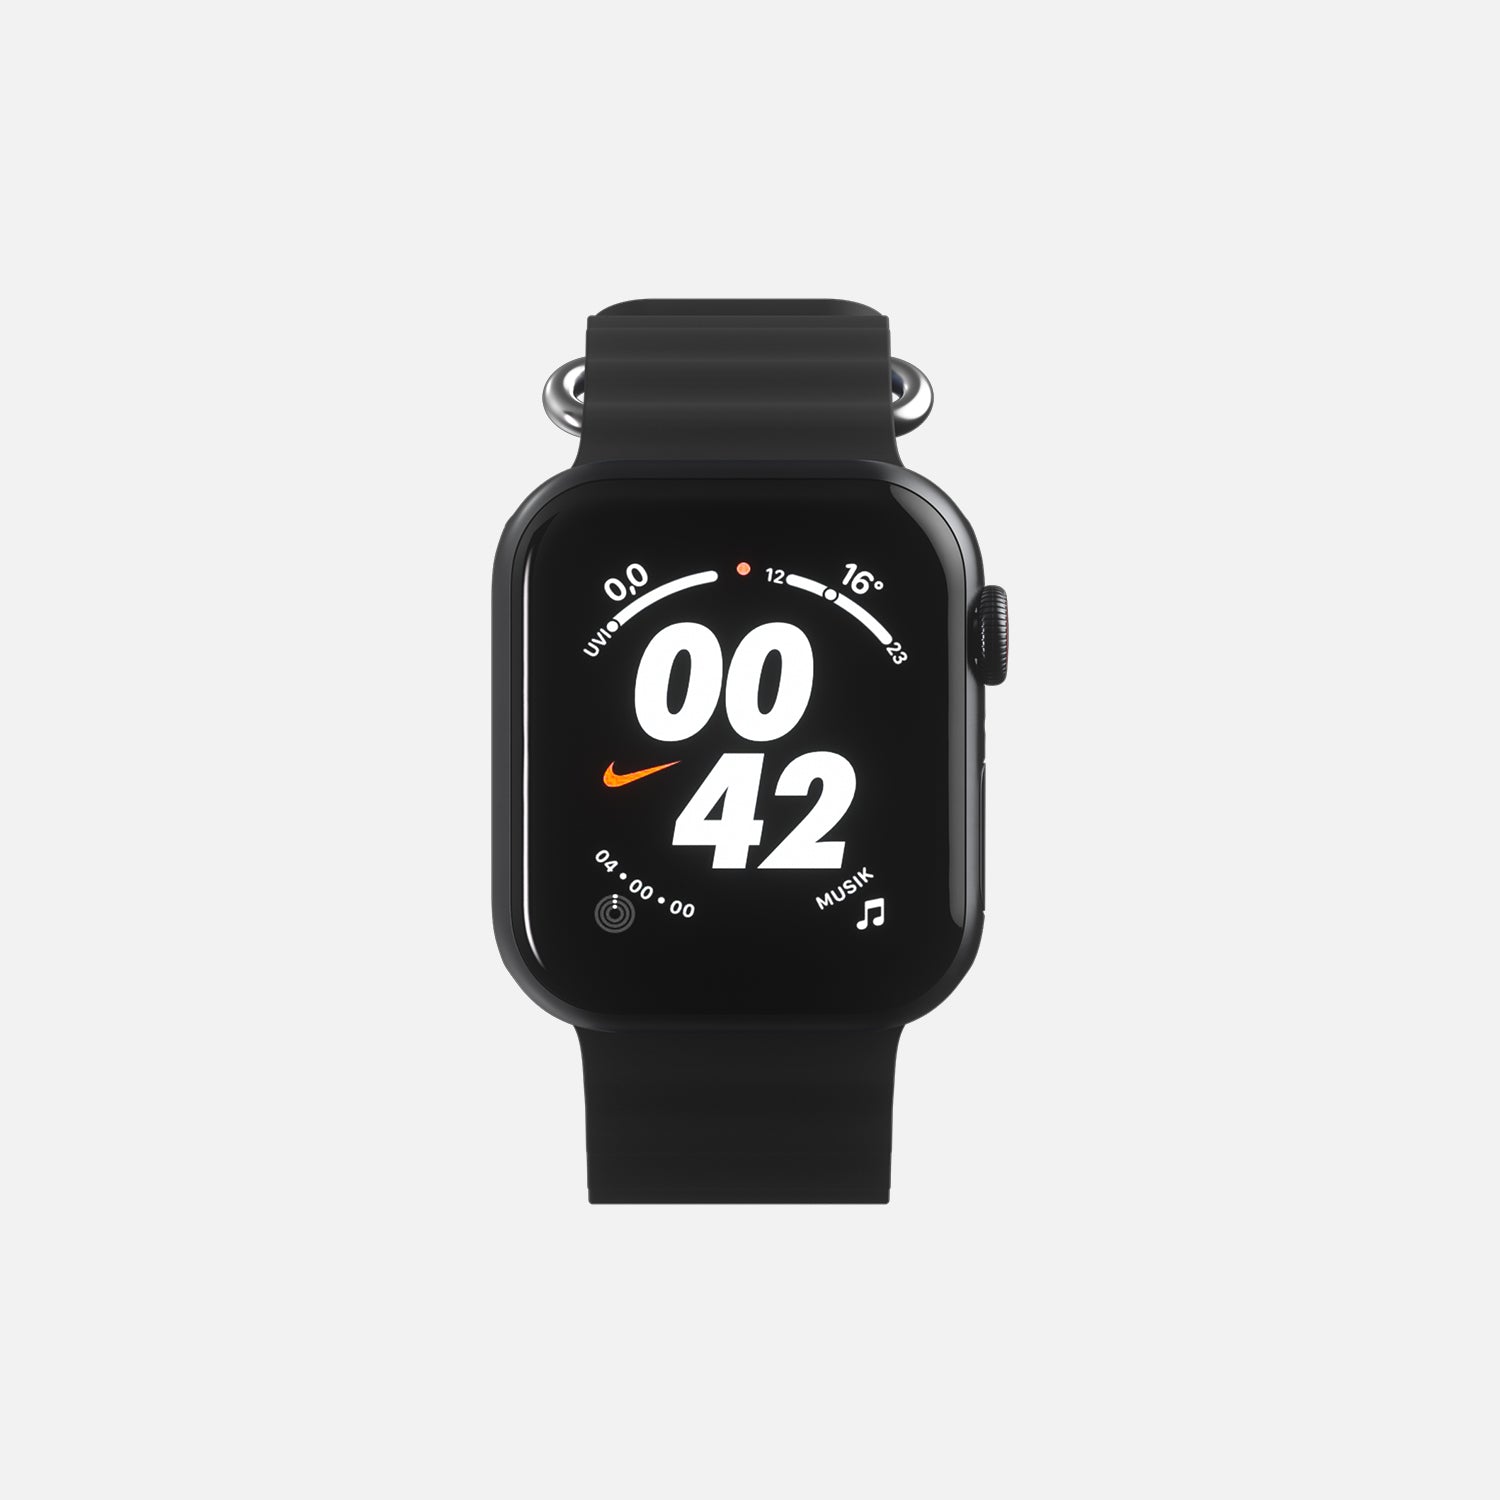 Black Apple smartwatch with Nike logo on digital display, isolated on white background.